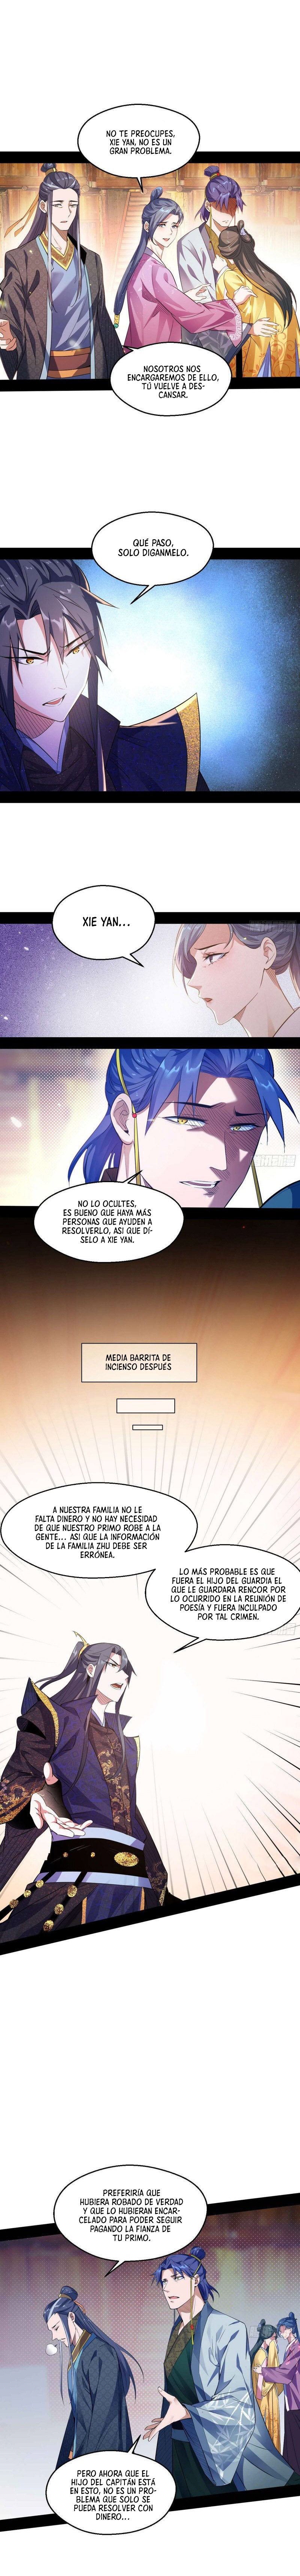 Manga Soy un dios maligno Chapter 110 image number 11